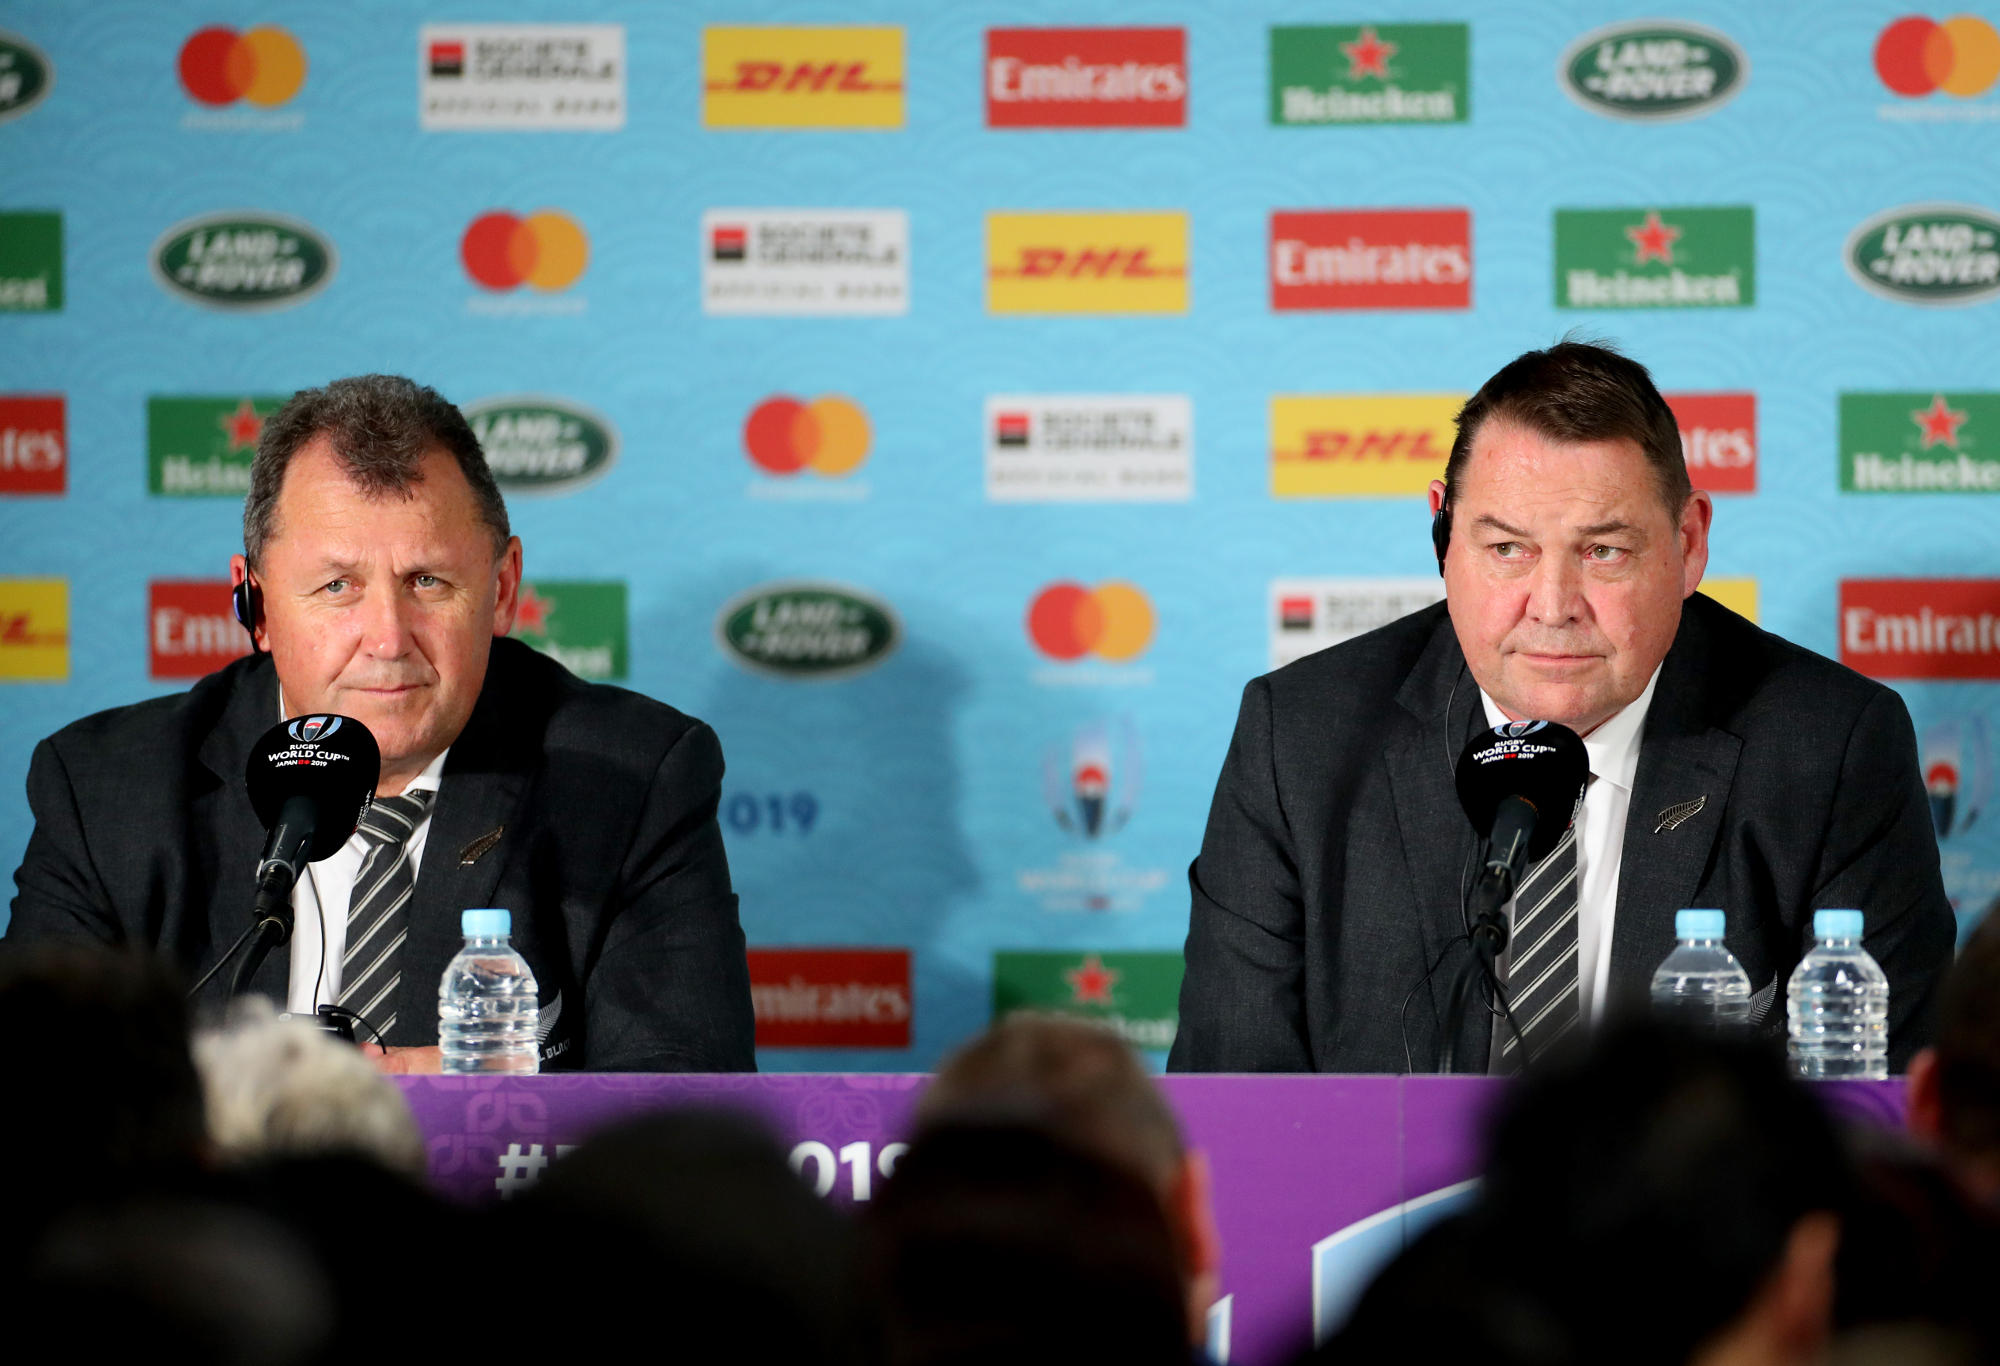 Hansen casts doubt on candidates and questions timing of appointment, but says All Blacks can still win RWC